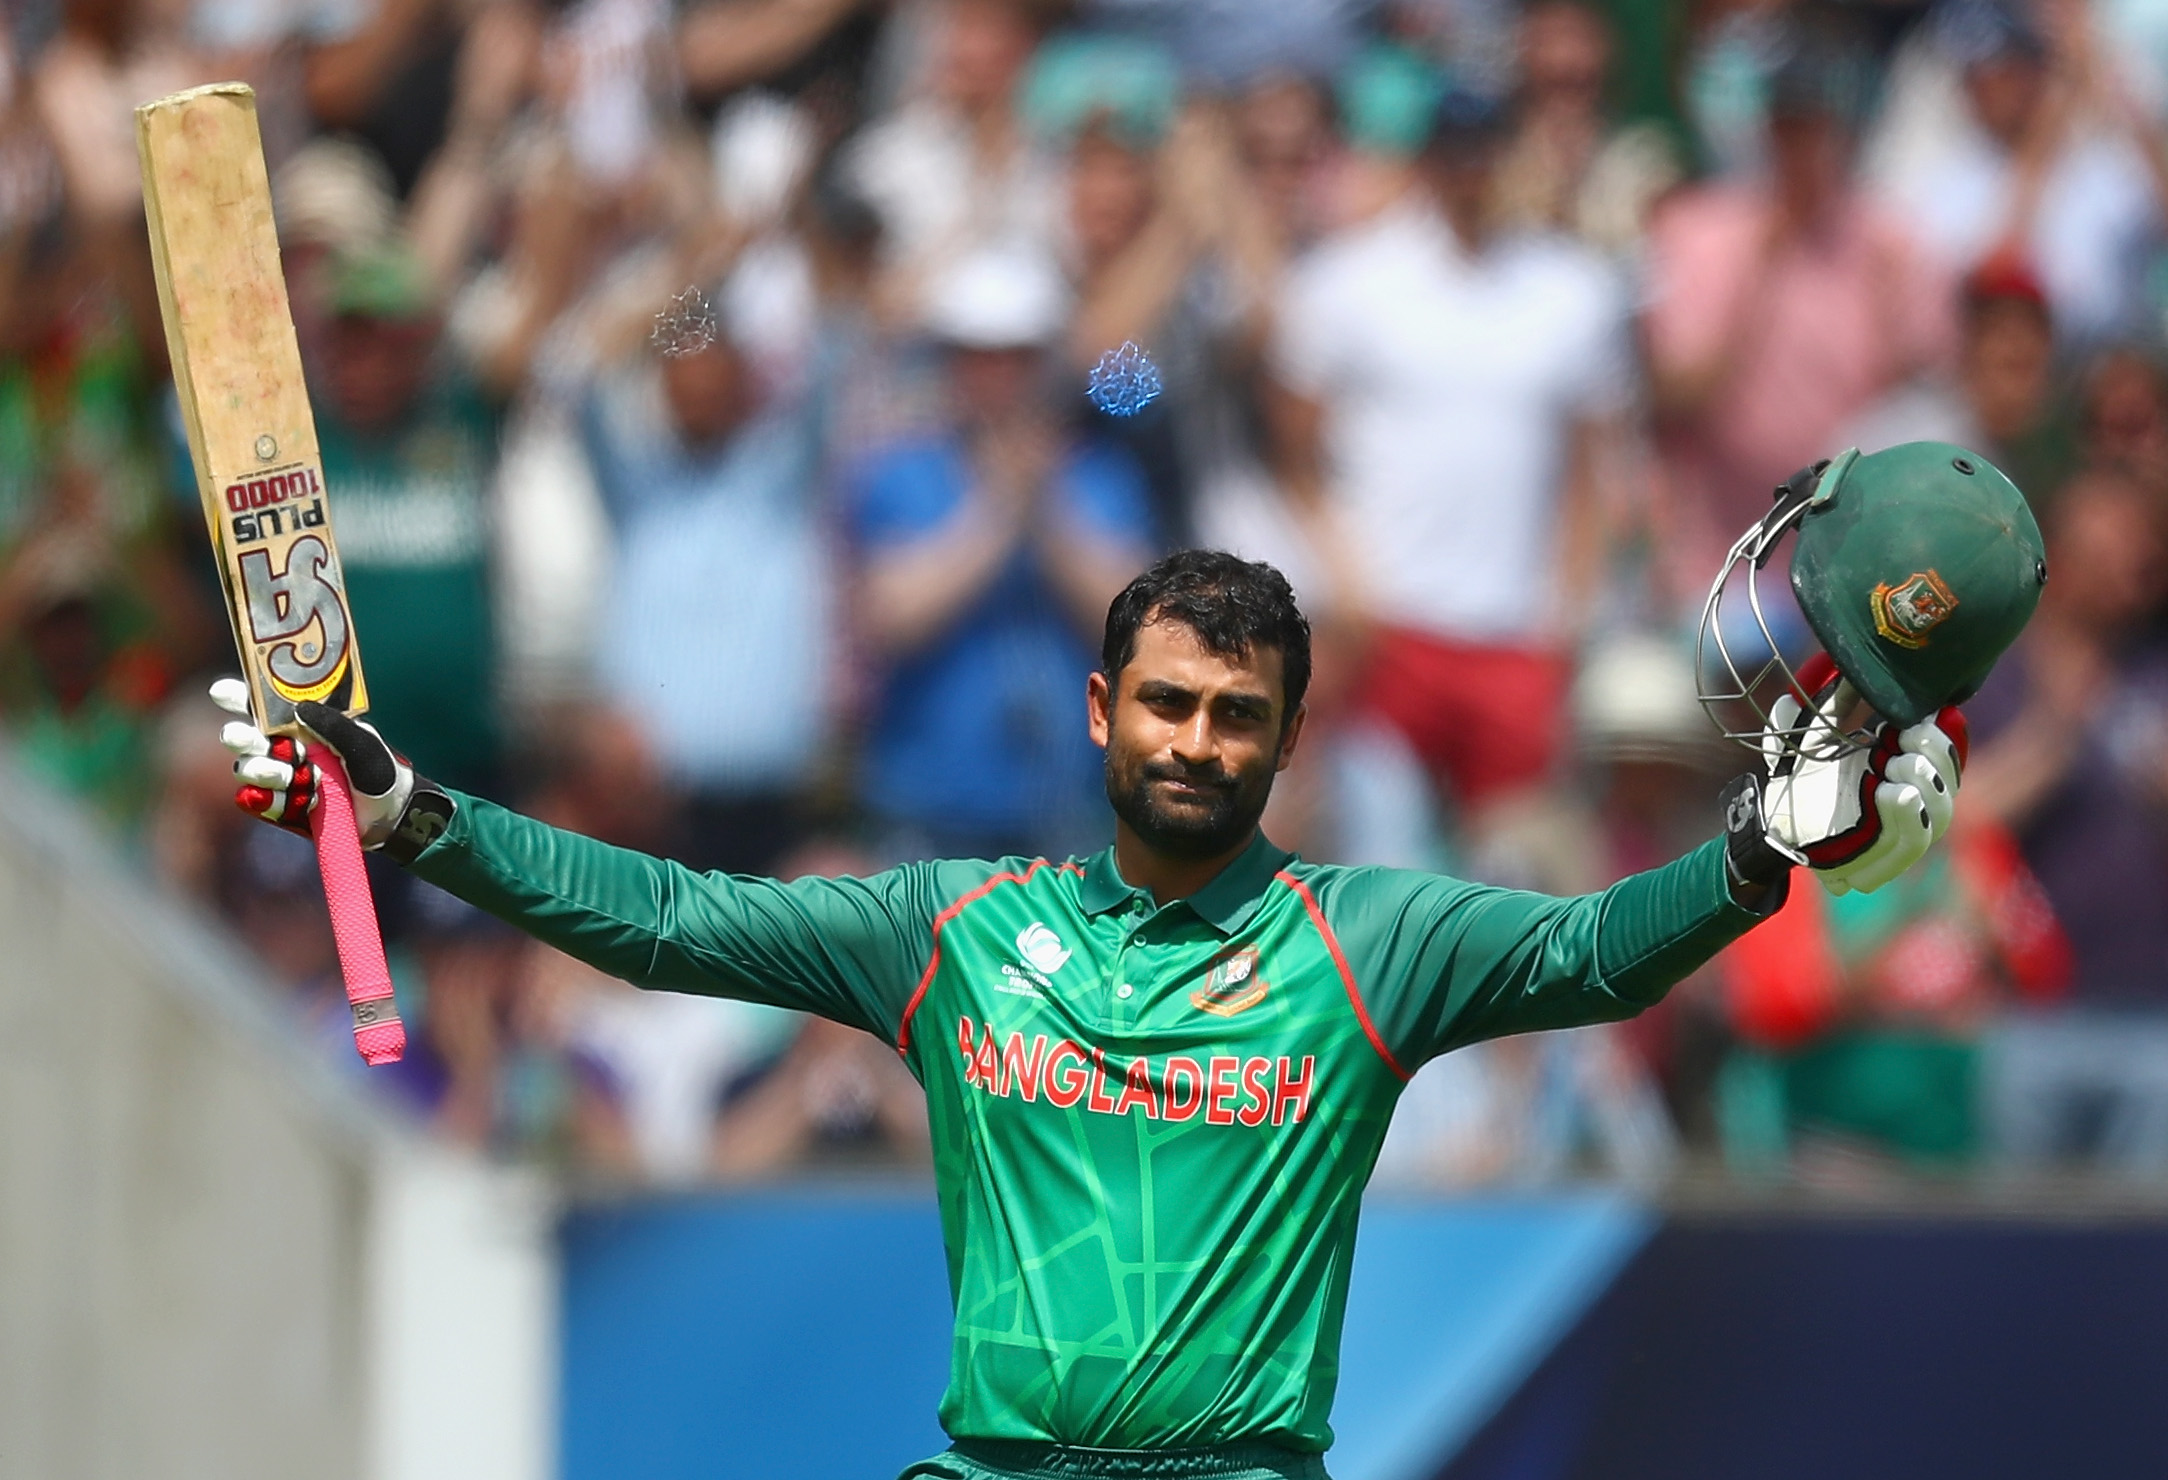 LONDON, ENGLAND - JUNE 01: Tamim Iqbal Khan of Bangladesh celebrates his century during the ICC Champions Cup Group A match between England and Bangladesh at The Kia Oval on June 1, 2017 in London, England. (Photo by Clive Rose/Getty Images)